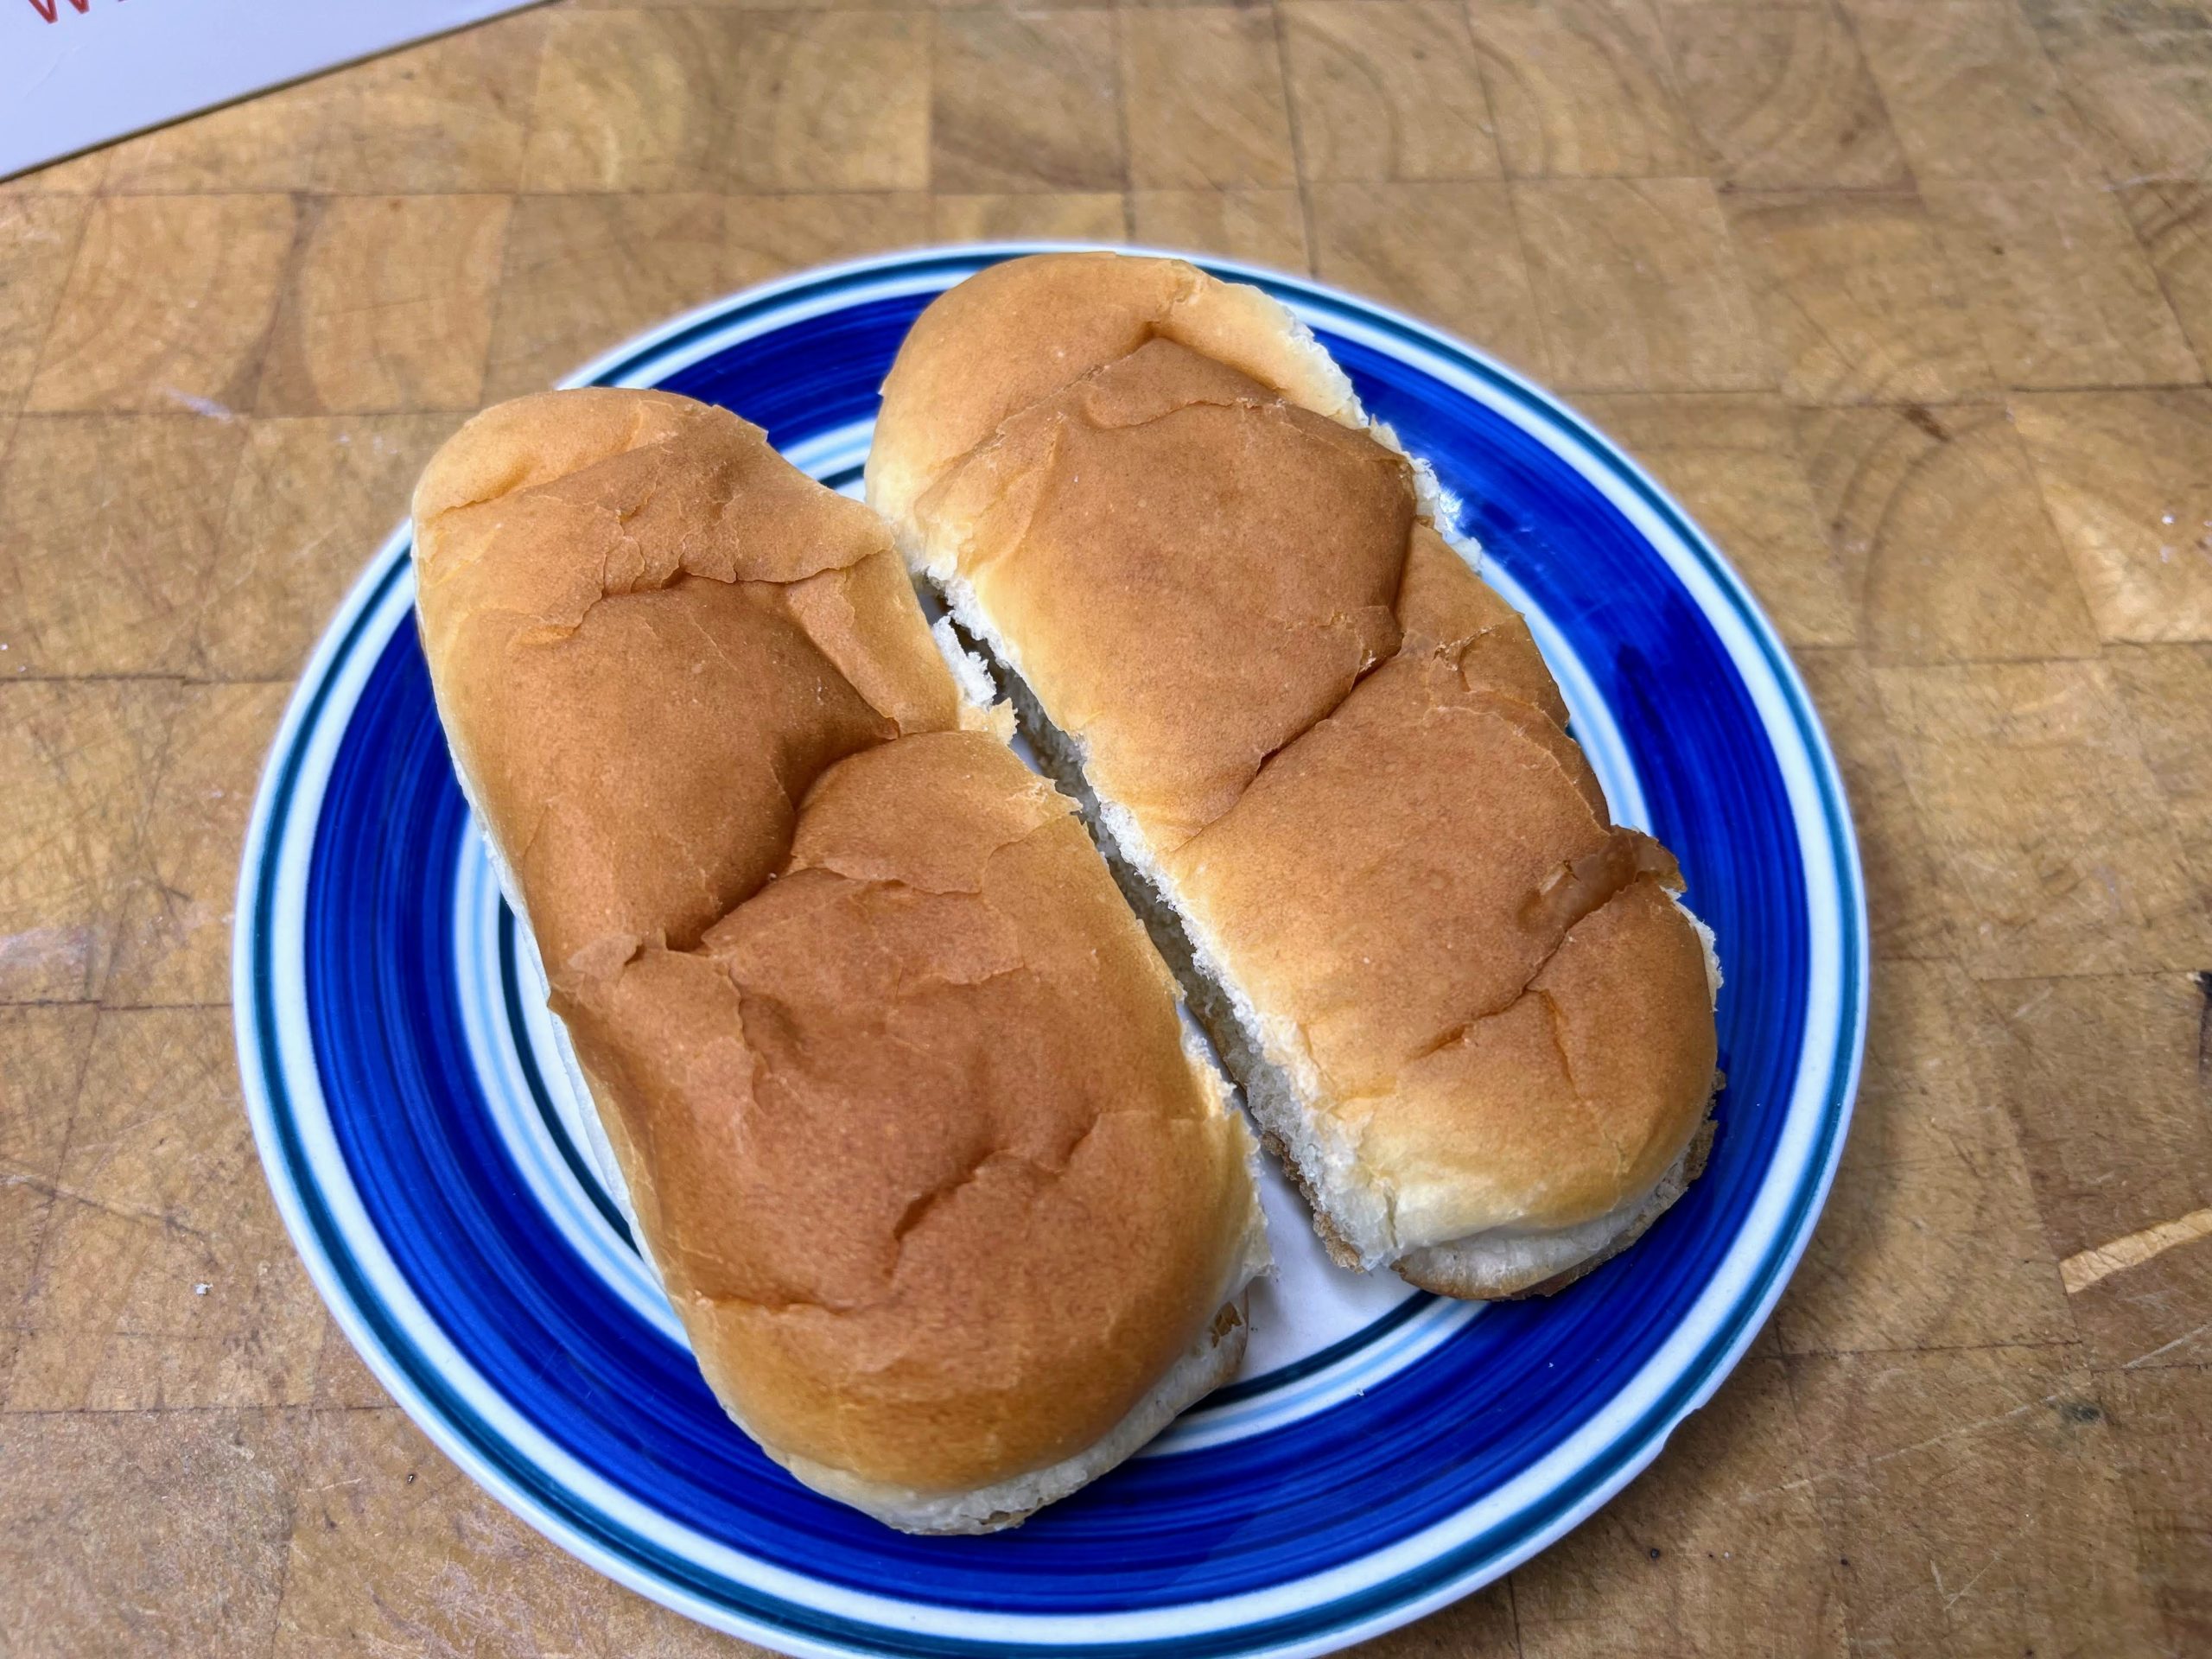 two hot dog buns on a plate